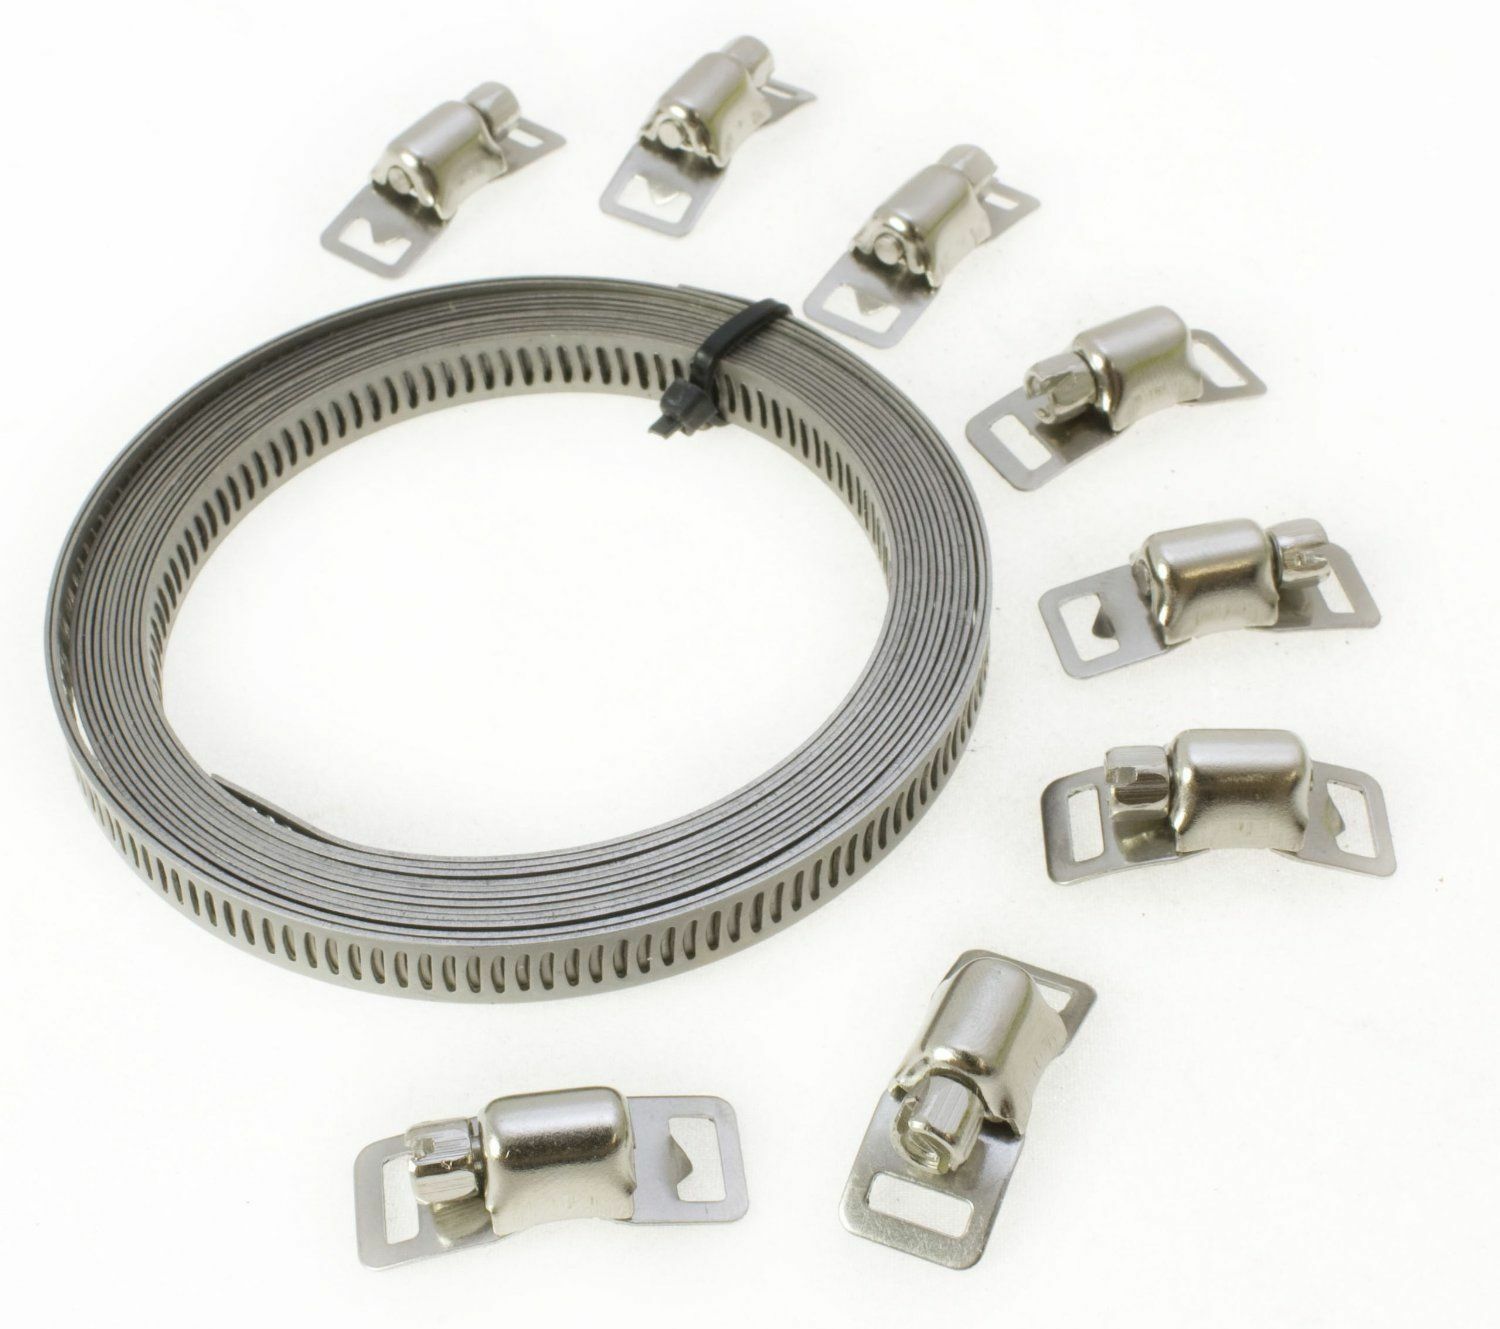 Hose Clamp Clips Jubilee Kit Make Your Clamps Any Size 3m X 8mm 8 Clamps